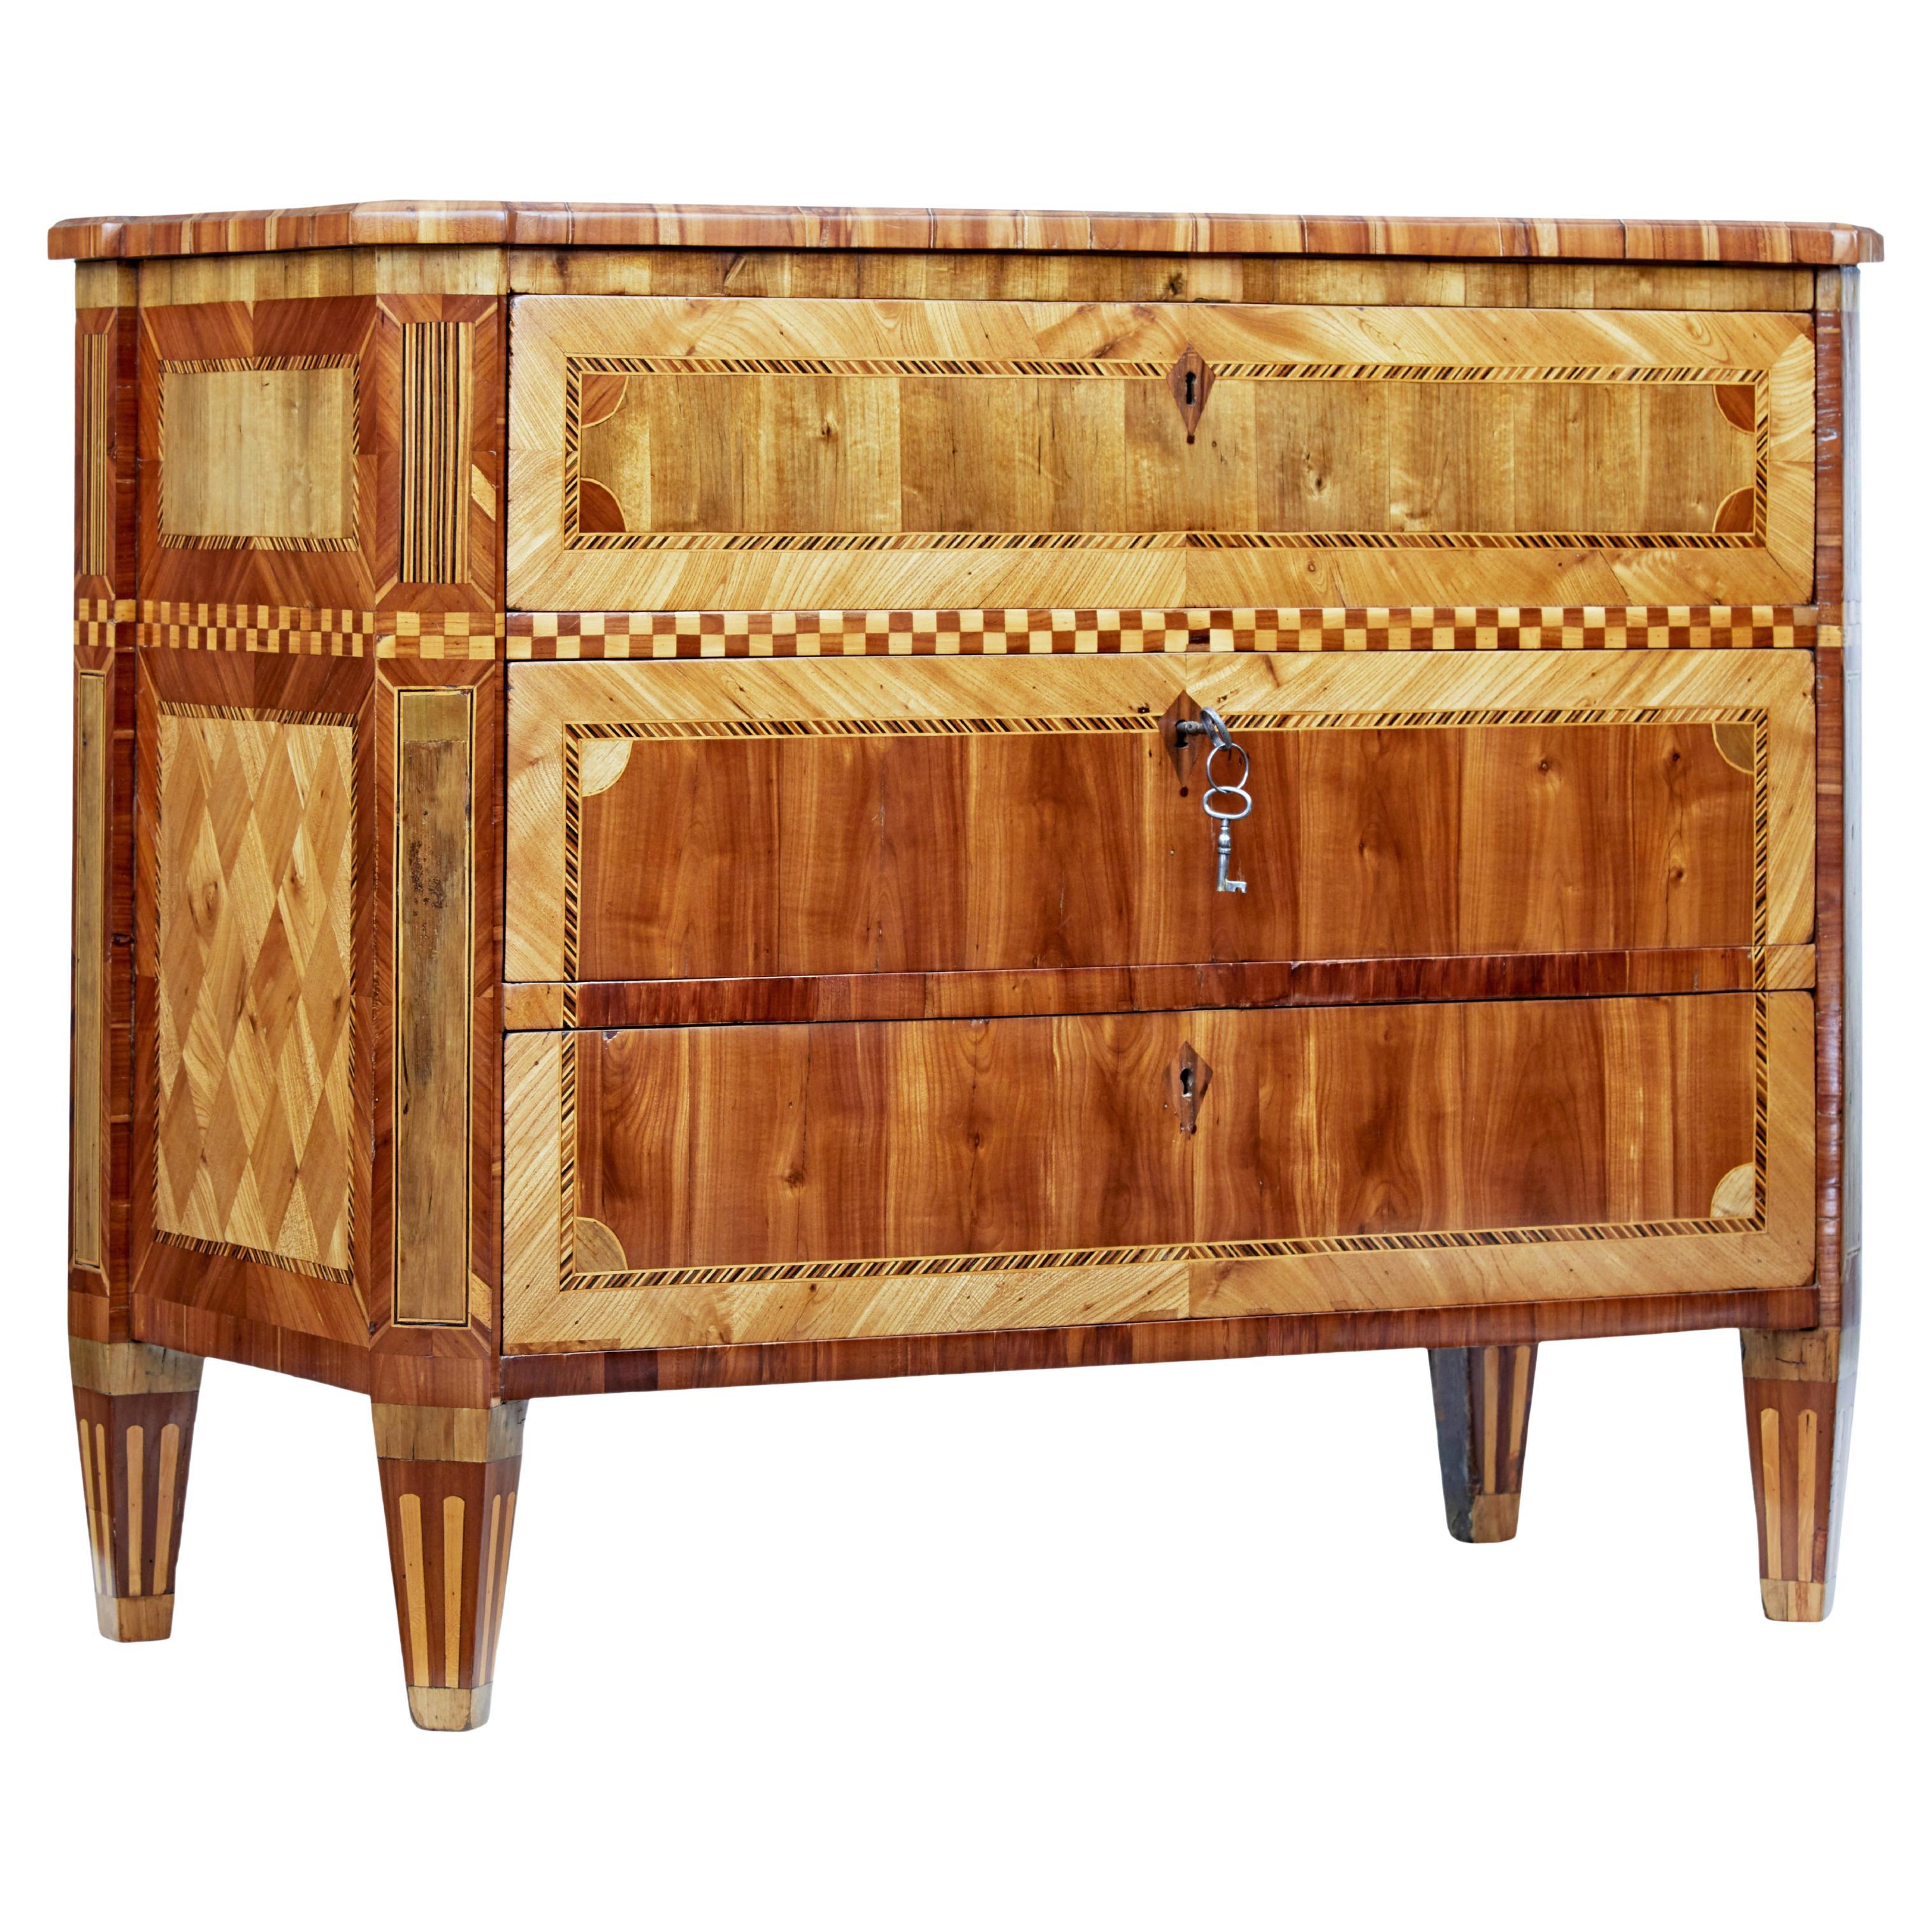 Hand-Carved Commodes and Chests of Drawers